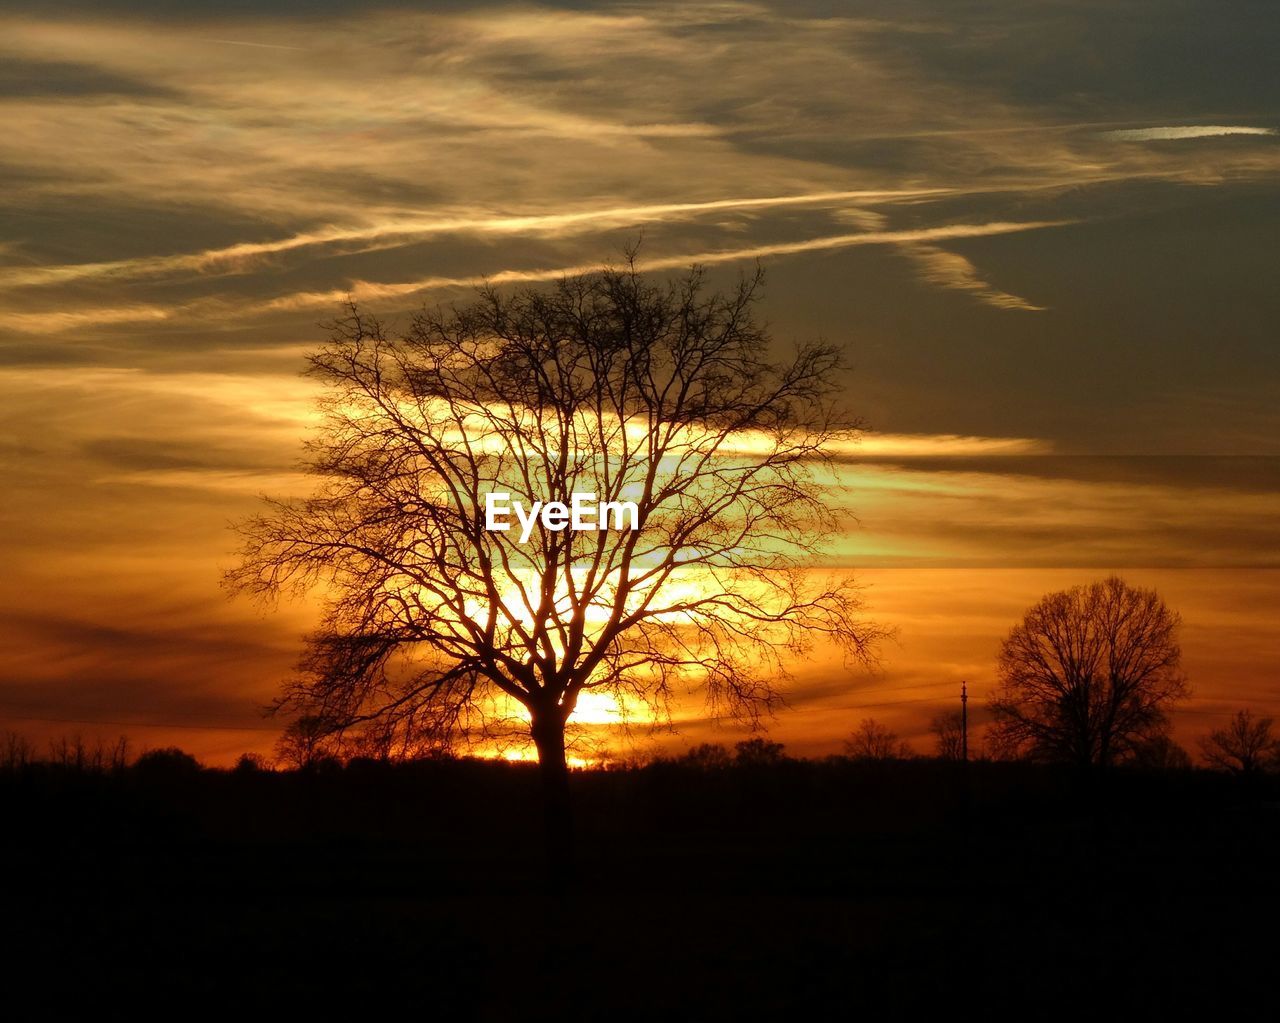 Bare tree on silhouette landscape during sunset